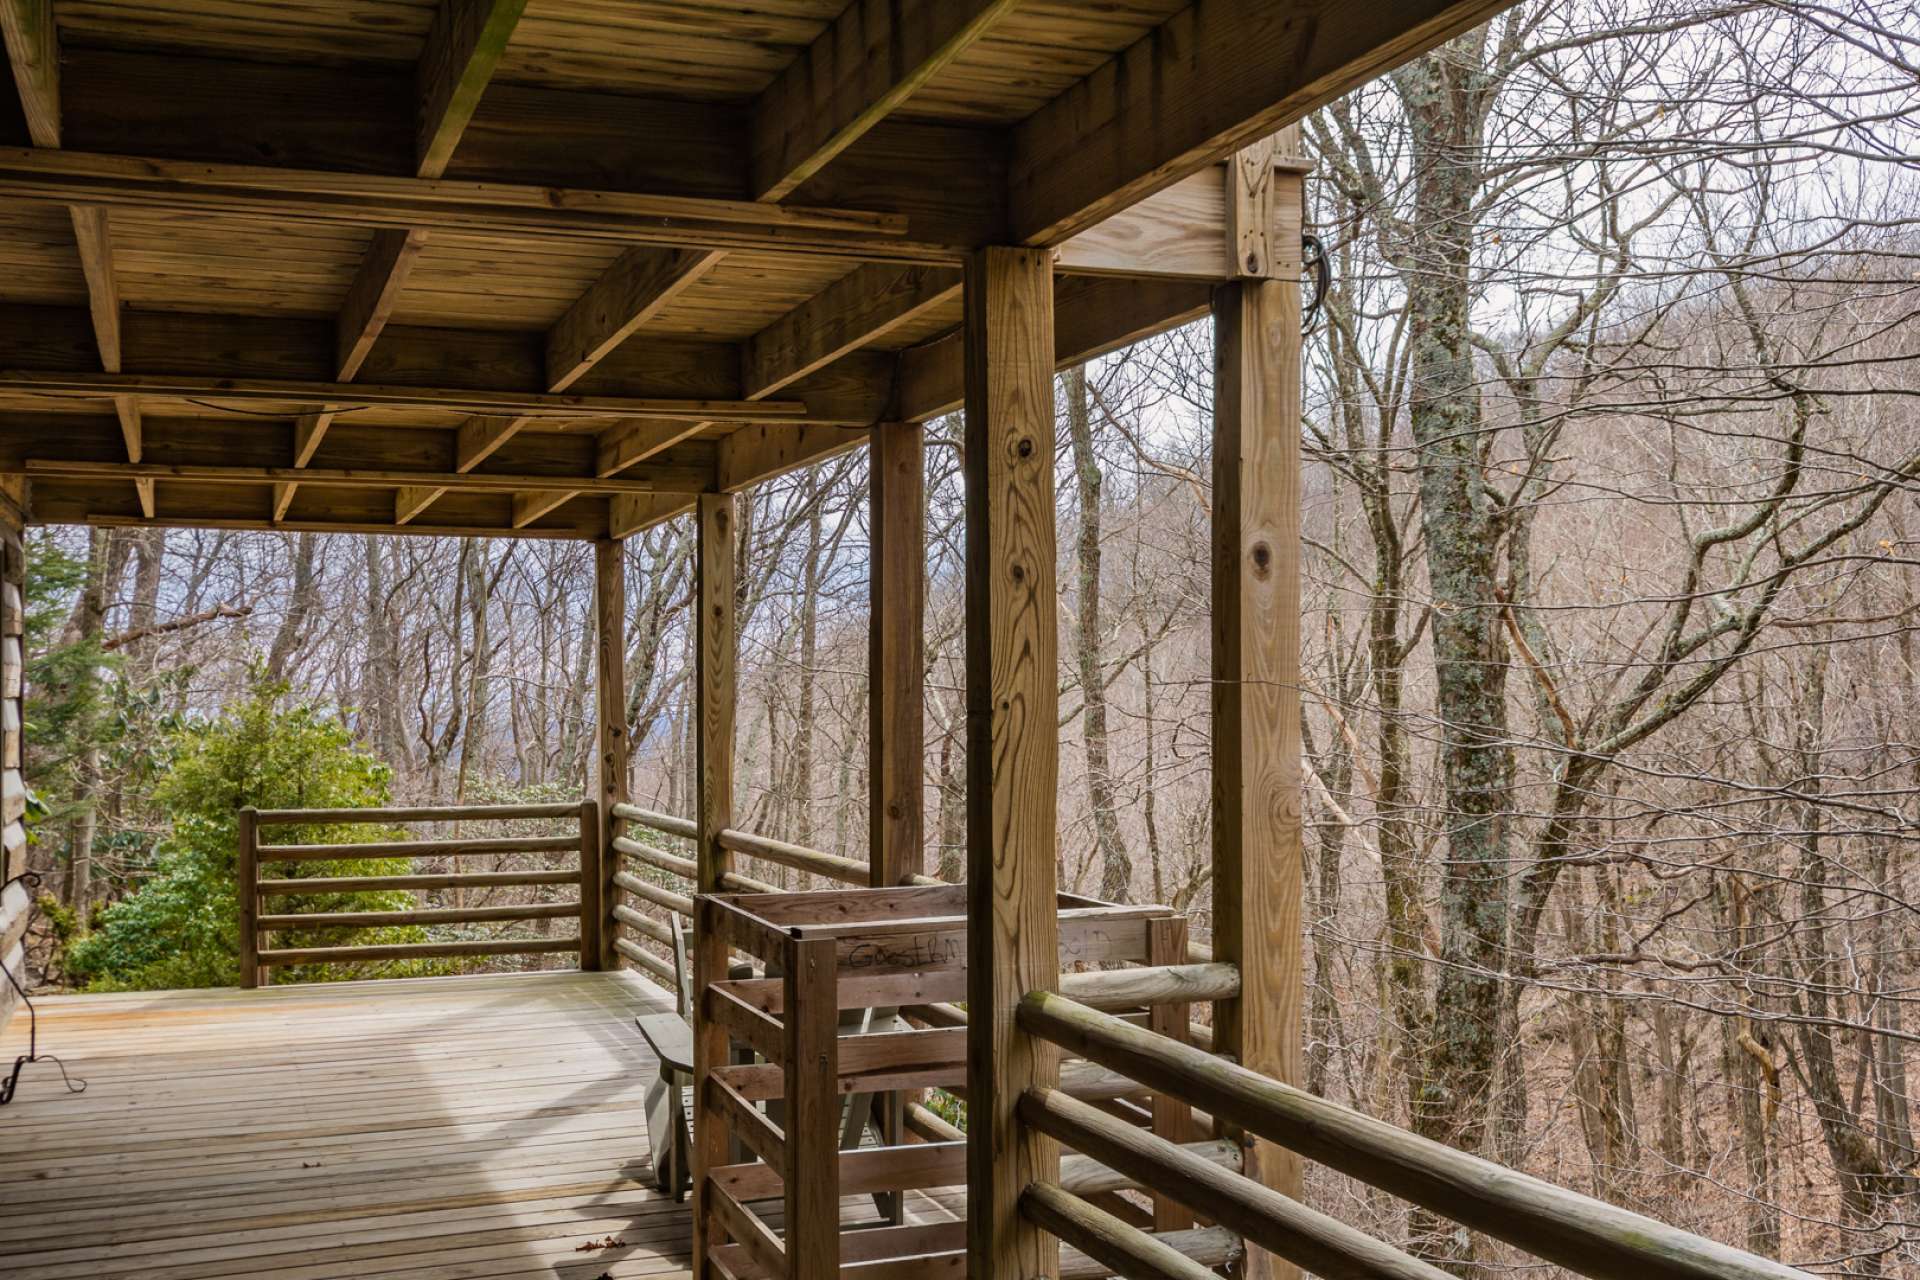 The lower level deck expands the outdoor living space and overlooks the woodlands with a rushing mountain creek.